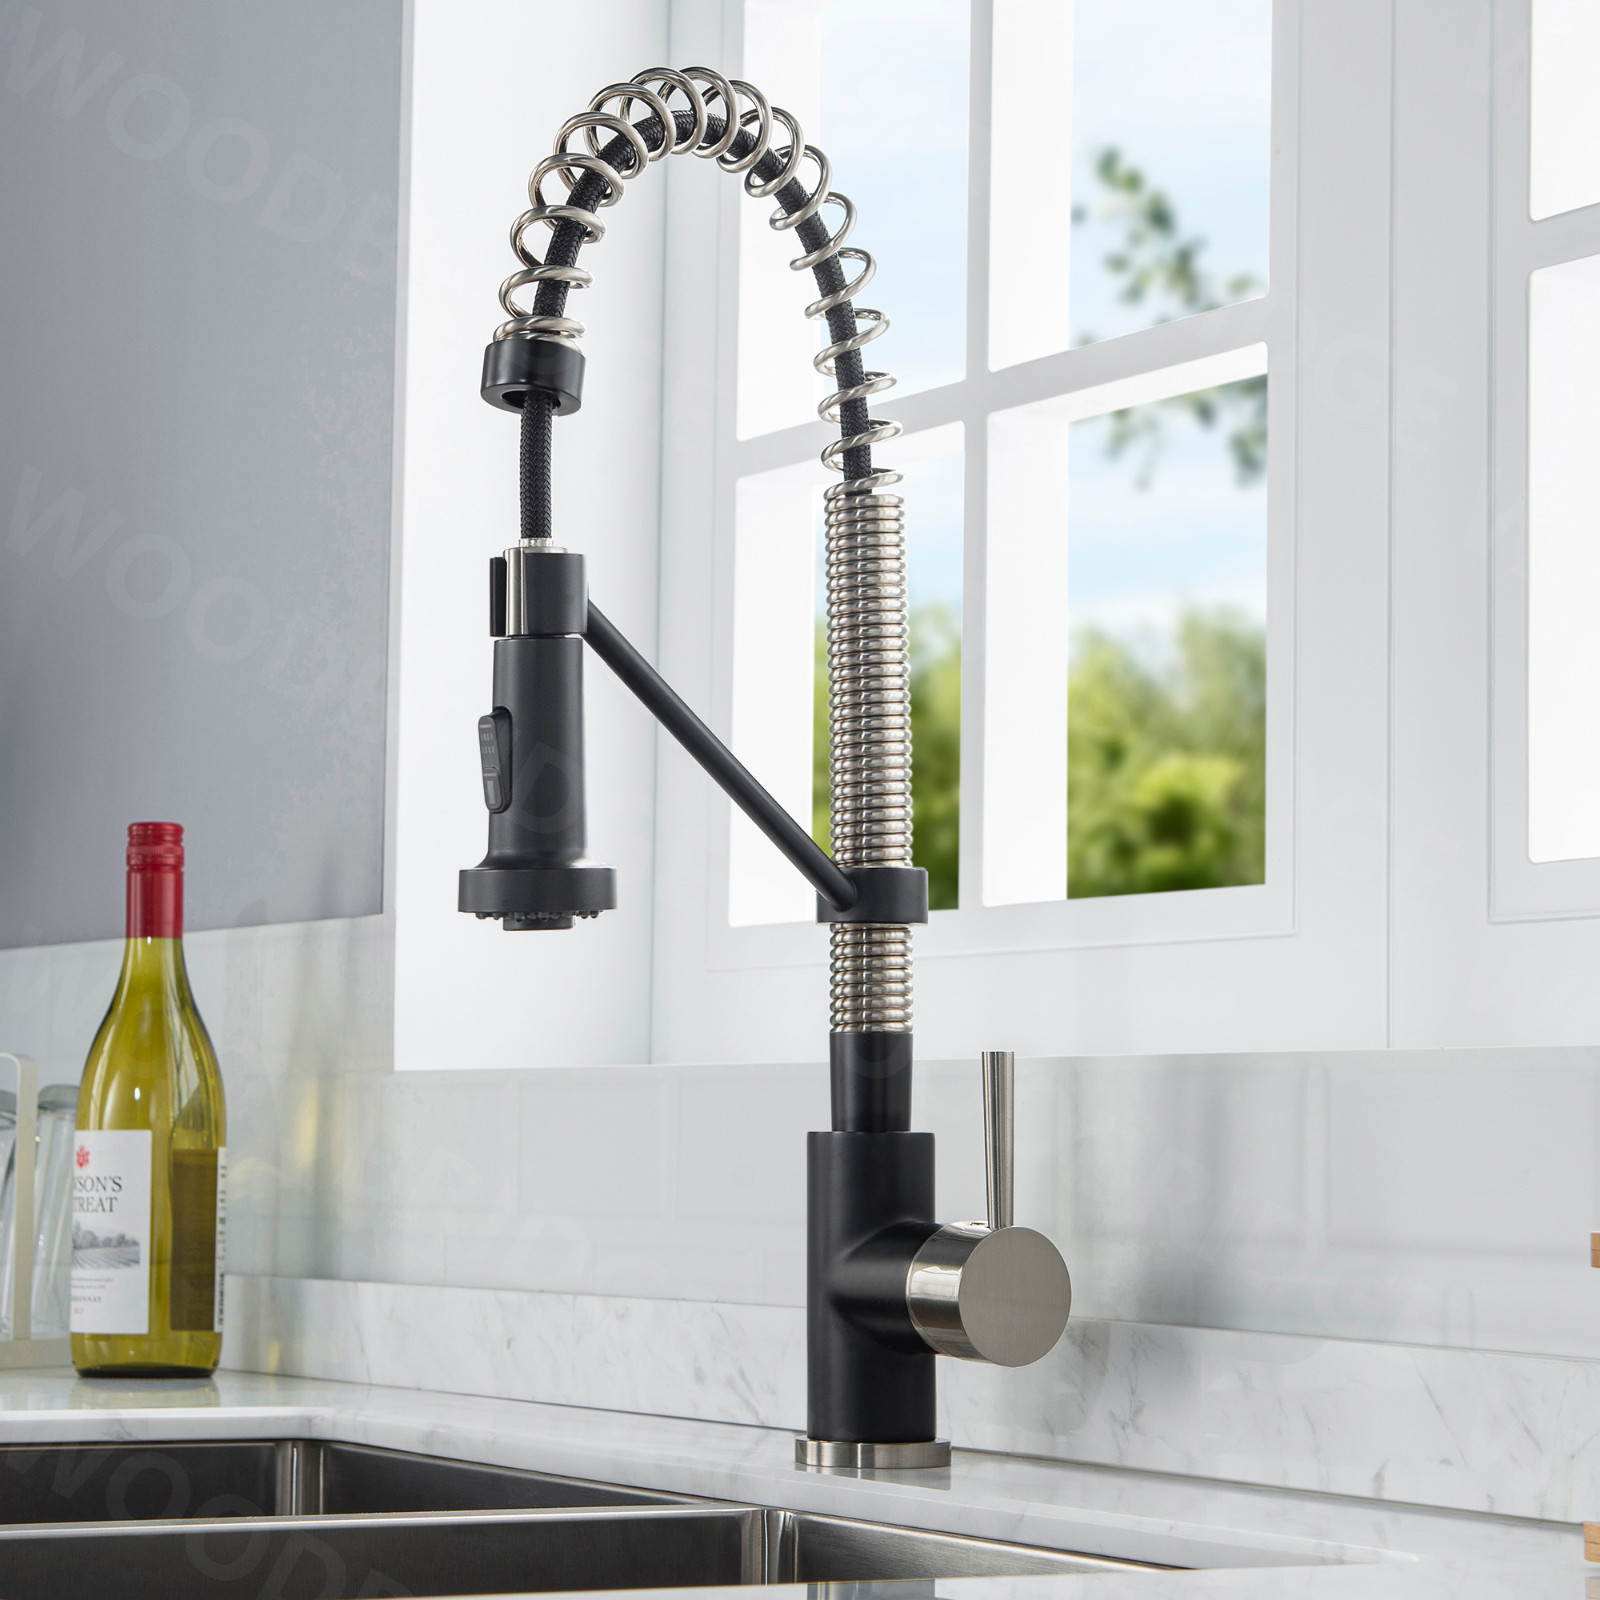  WOODBRIDGE WK010203BL Stainless Steel Single Handle Spring Coil Pre-Rinse Kitchen Faucet with Pull Down Sprayer, Matte Black Finish_9462